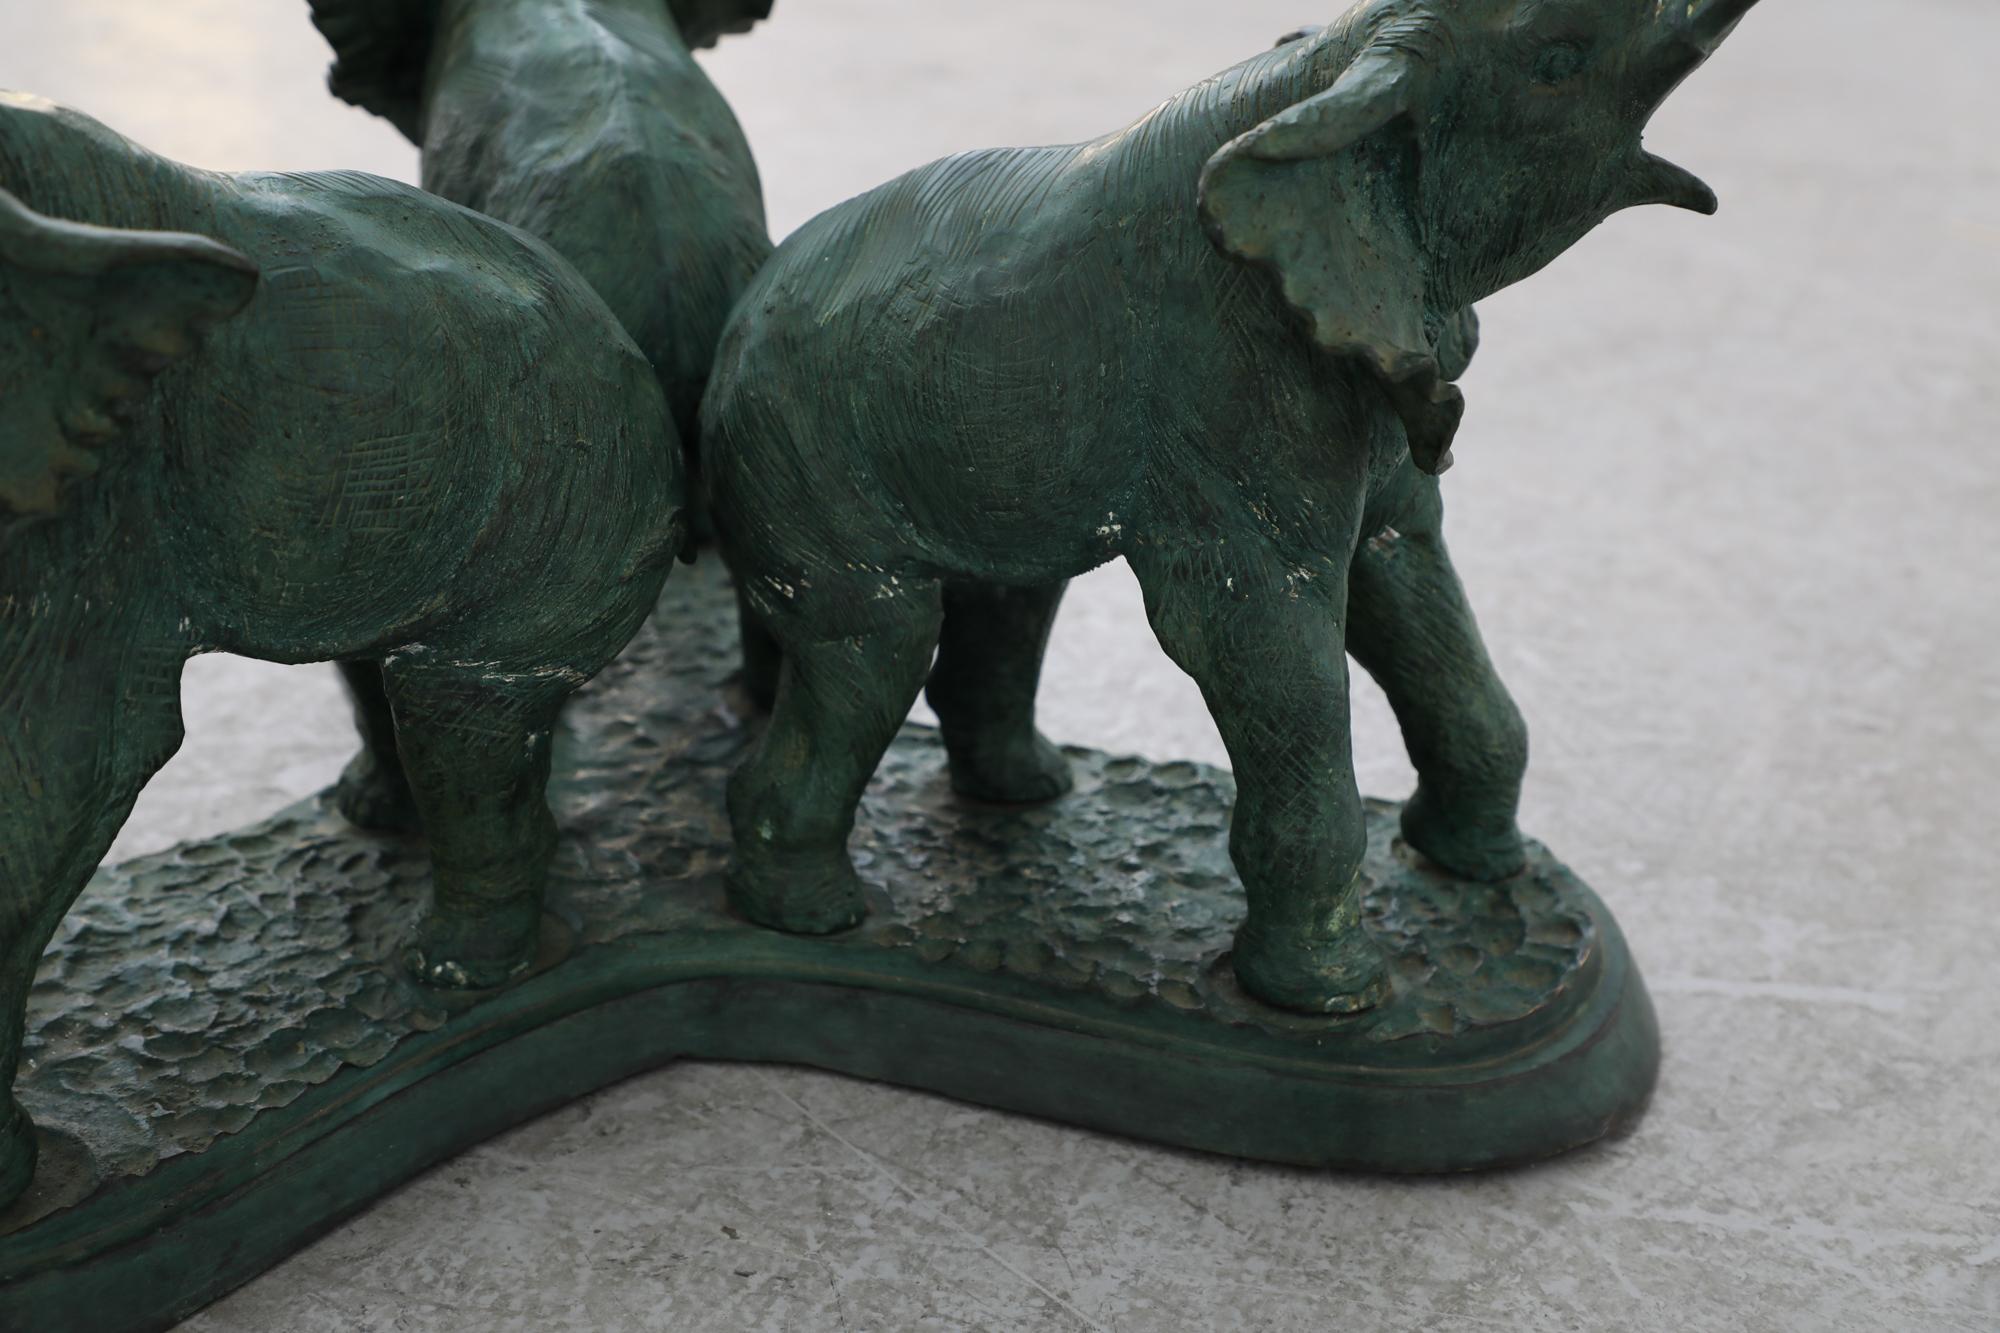 Belgian Sculptural Bronze and Glass Salon Table w/ Trio of Elephants Base, 1970s For Sale 4